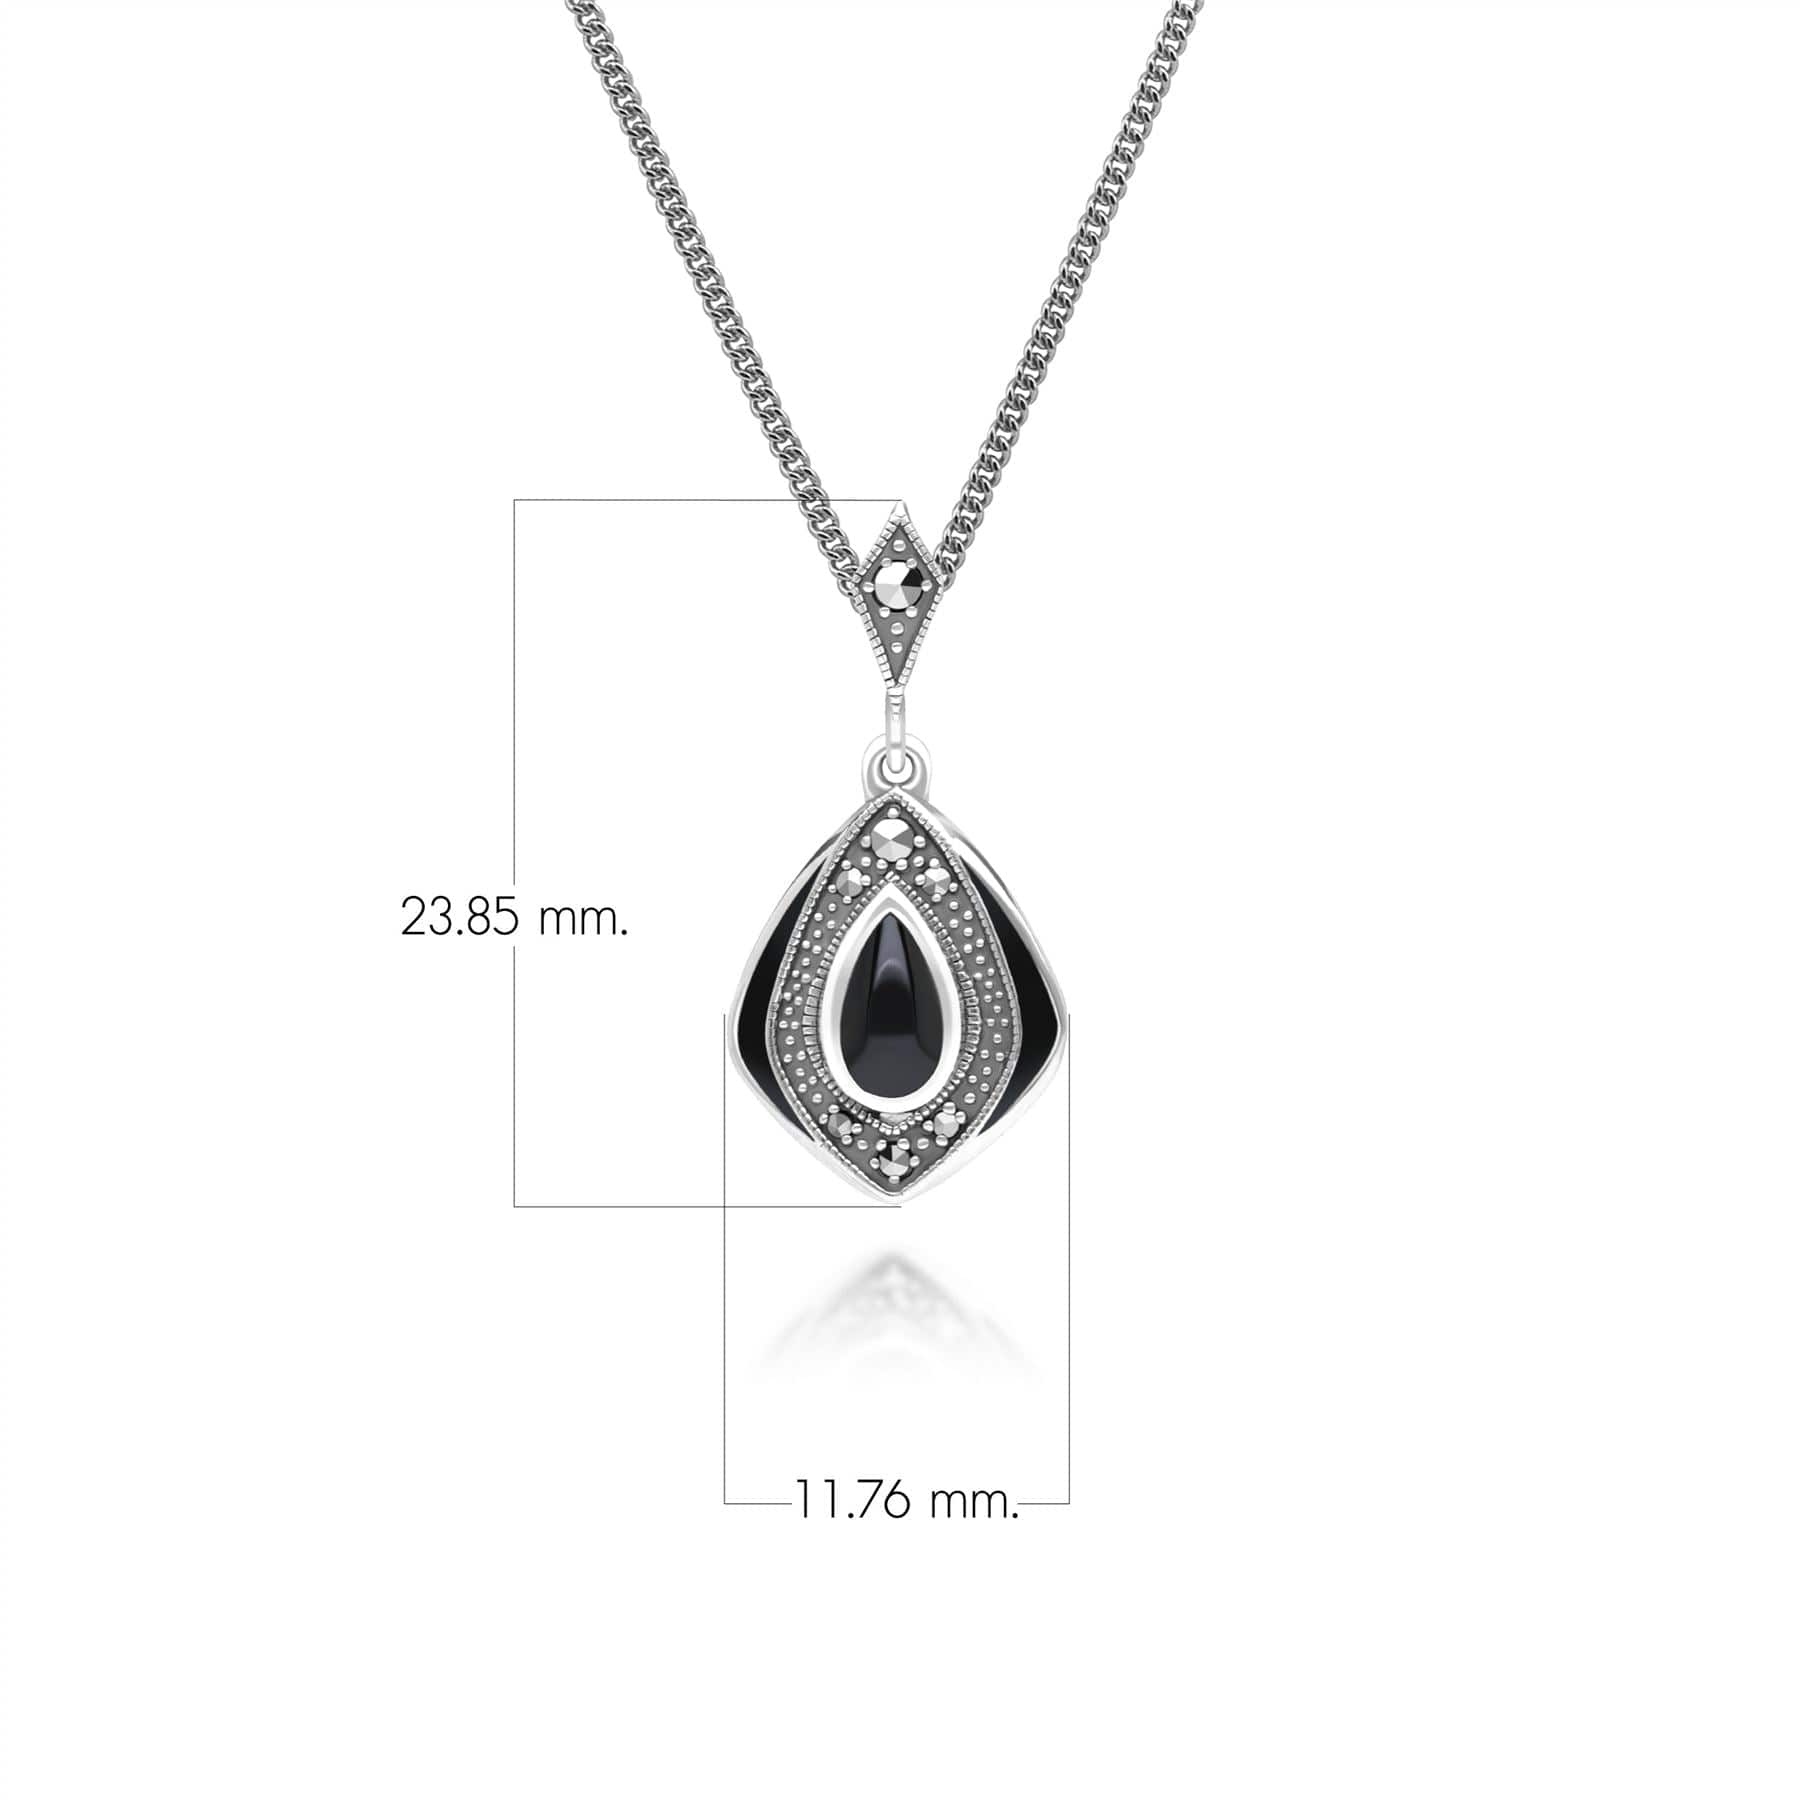 Art Deco Style Kite Onyx and Marcasite Pendant Necklace in Sterling Silver 214P334101925 Dimensions